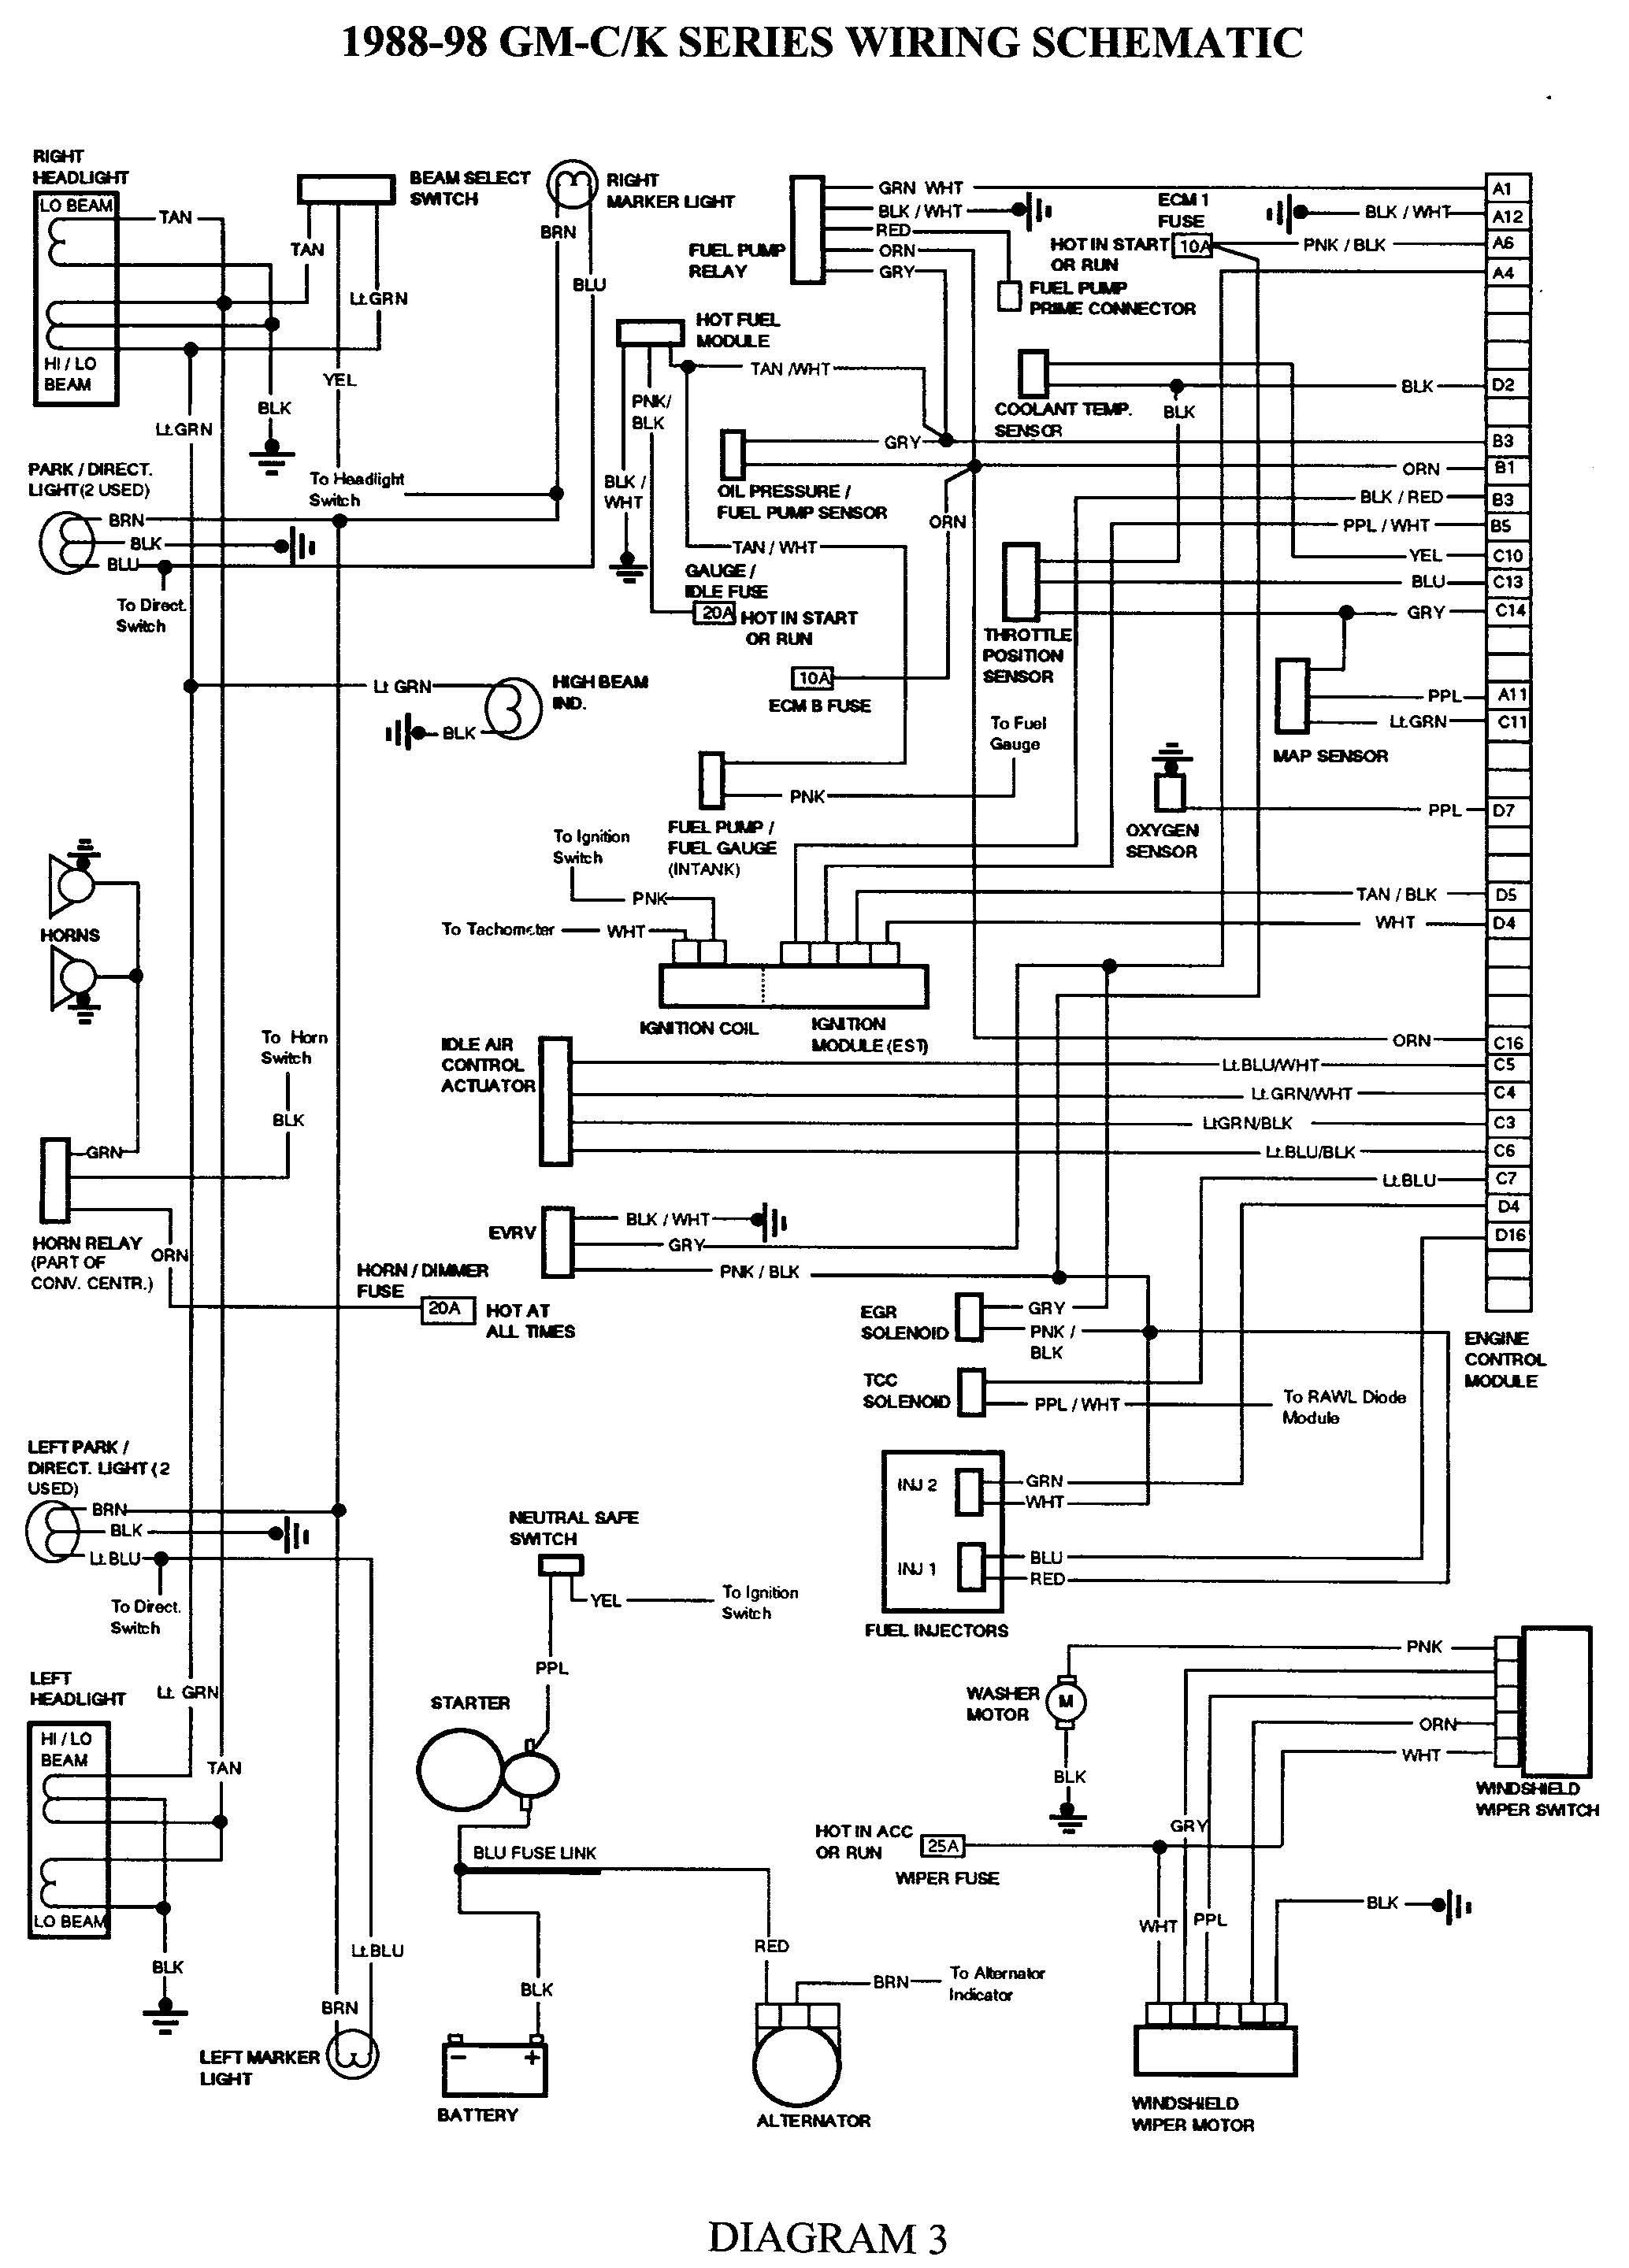 1991 Caprice Wiring Diagram - Wiring Diagrams Click - 1991 Chevy Truck Wiring Diagram